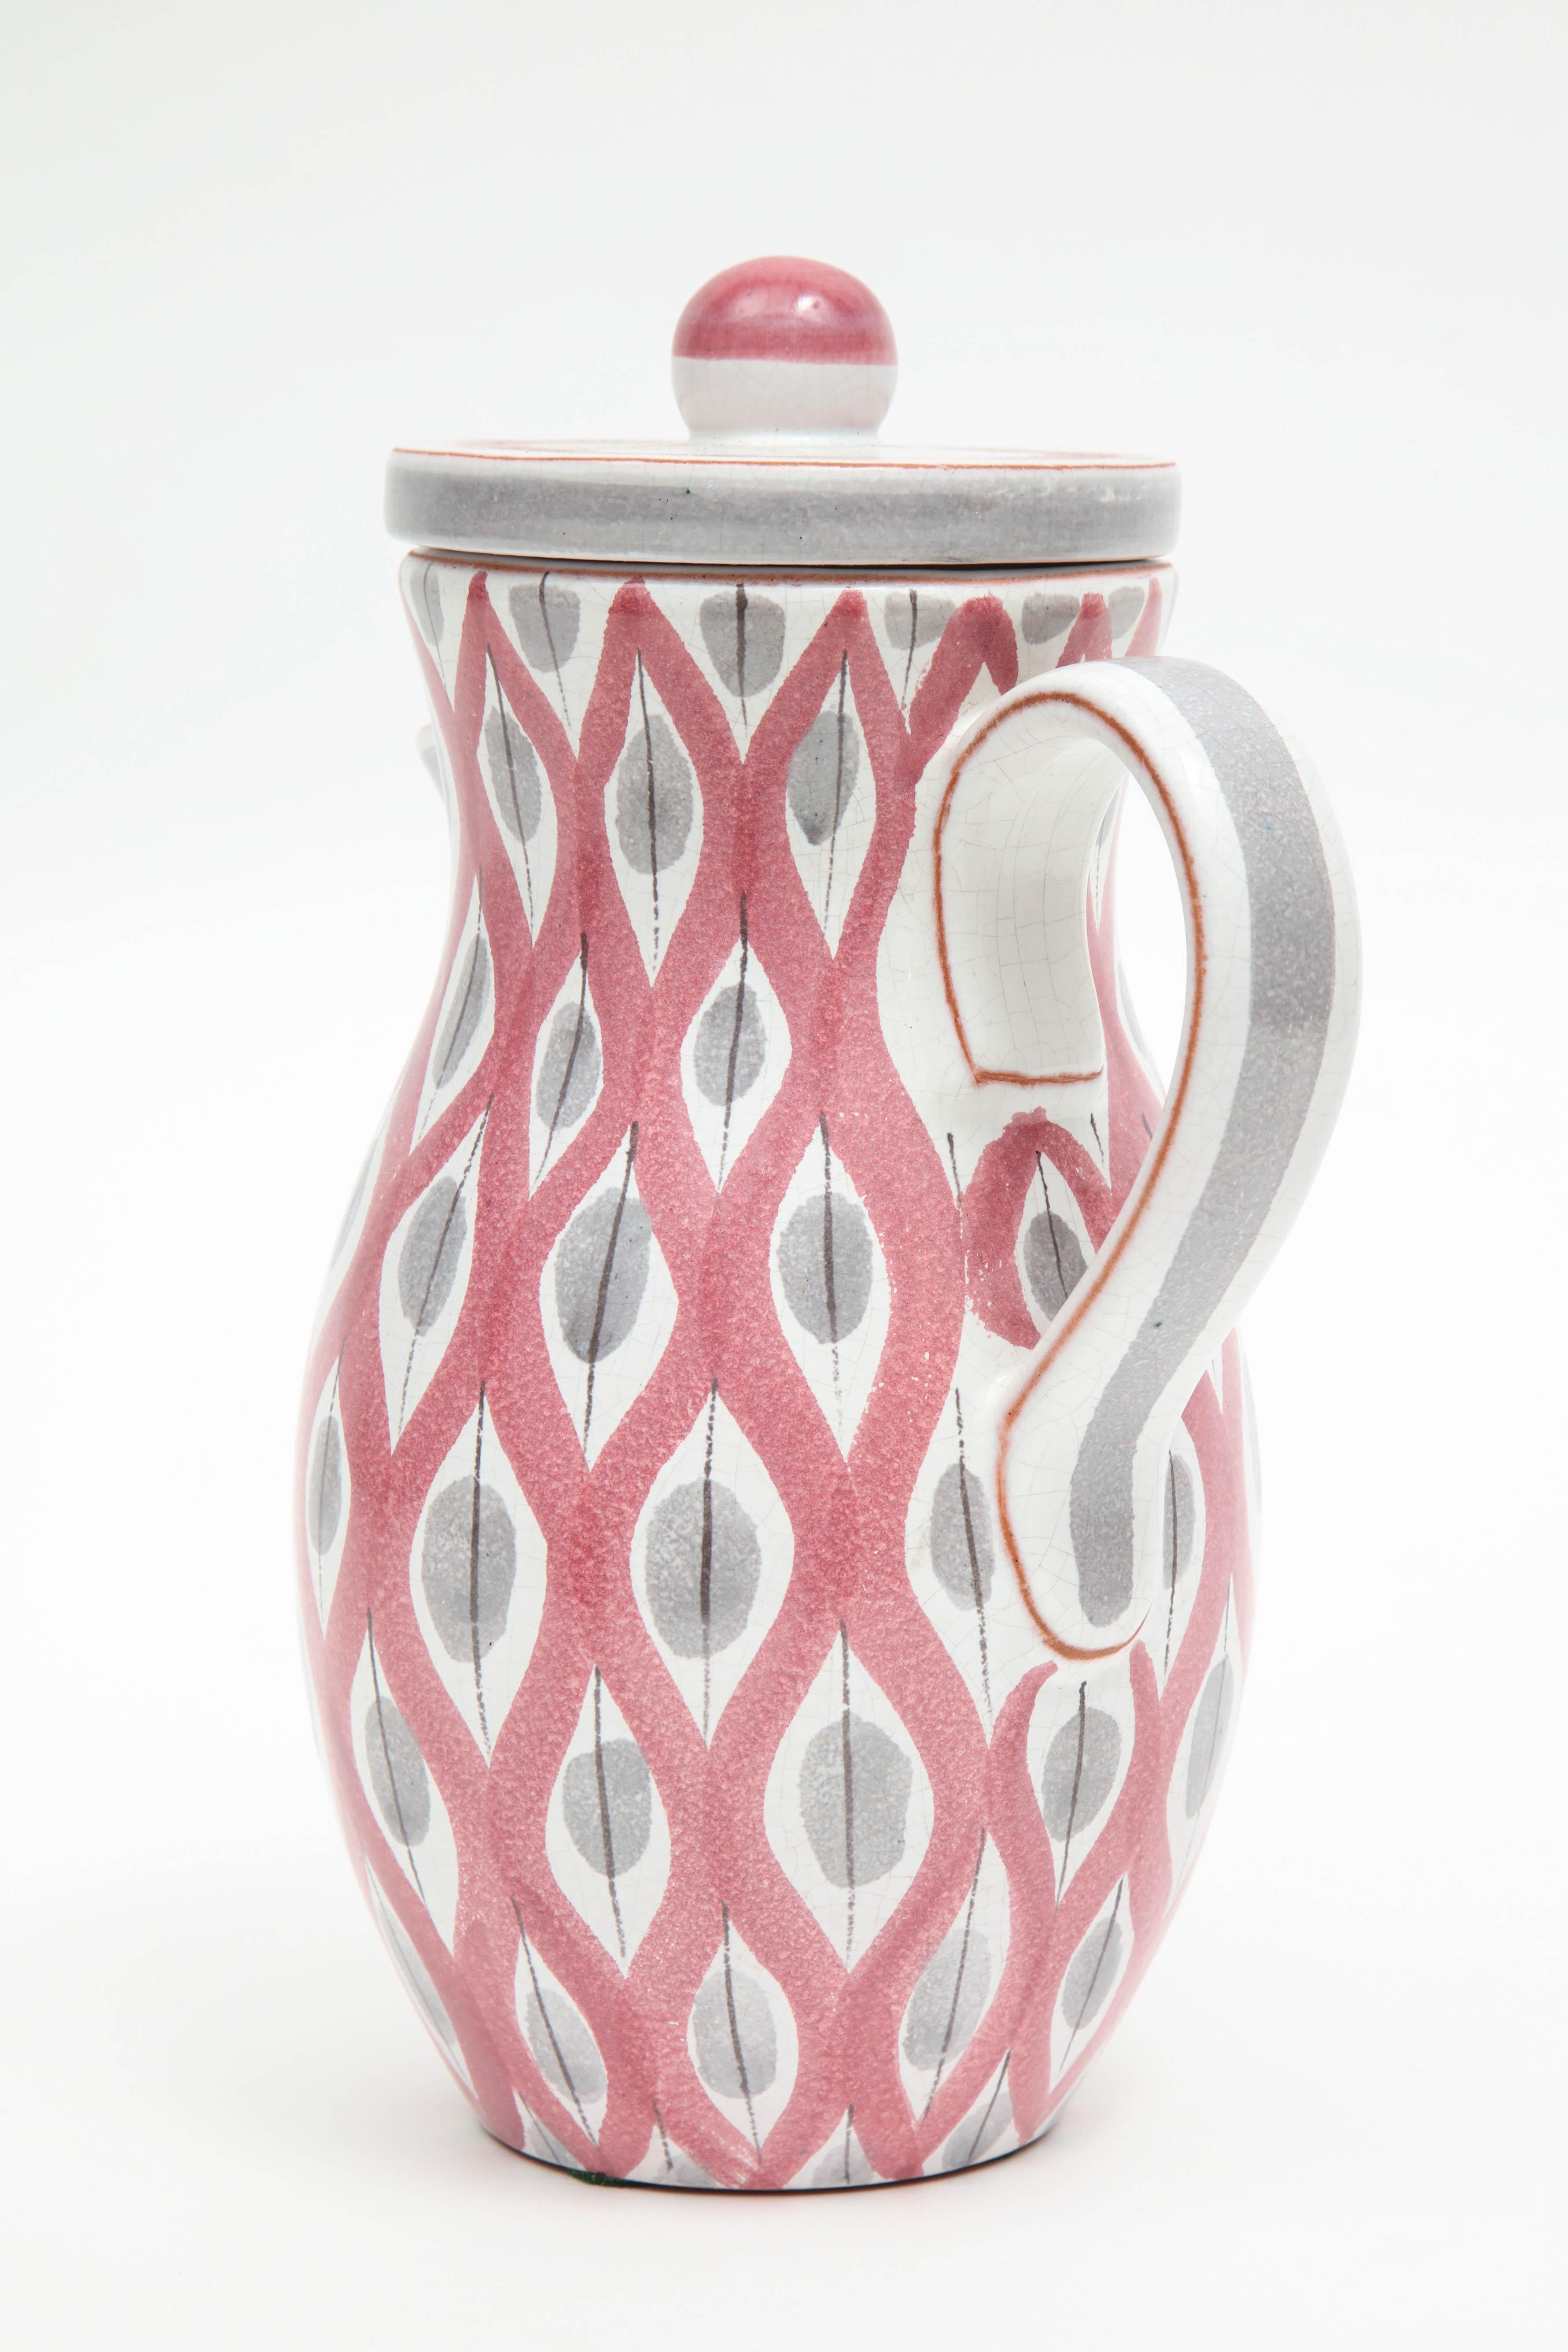 Mid-Century Modern Pitcher by Stig Lindberg, Scandinavian, Midcentury, Red, Gray and White, C 1950 For Sale